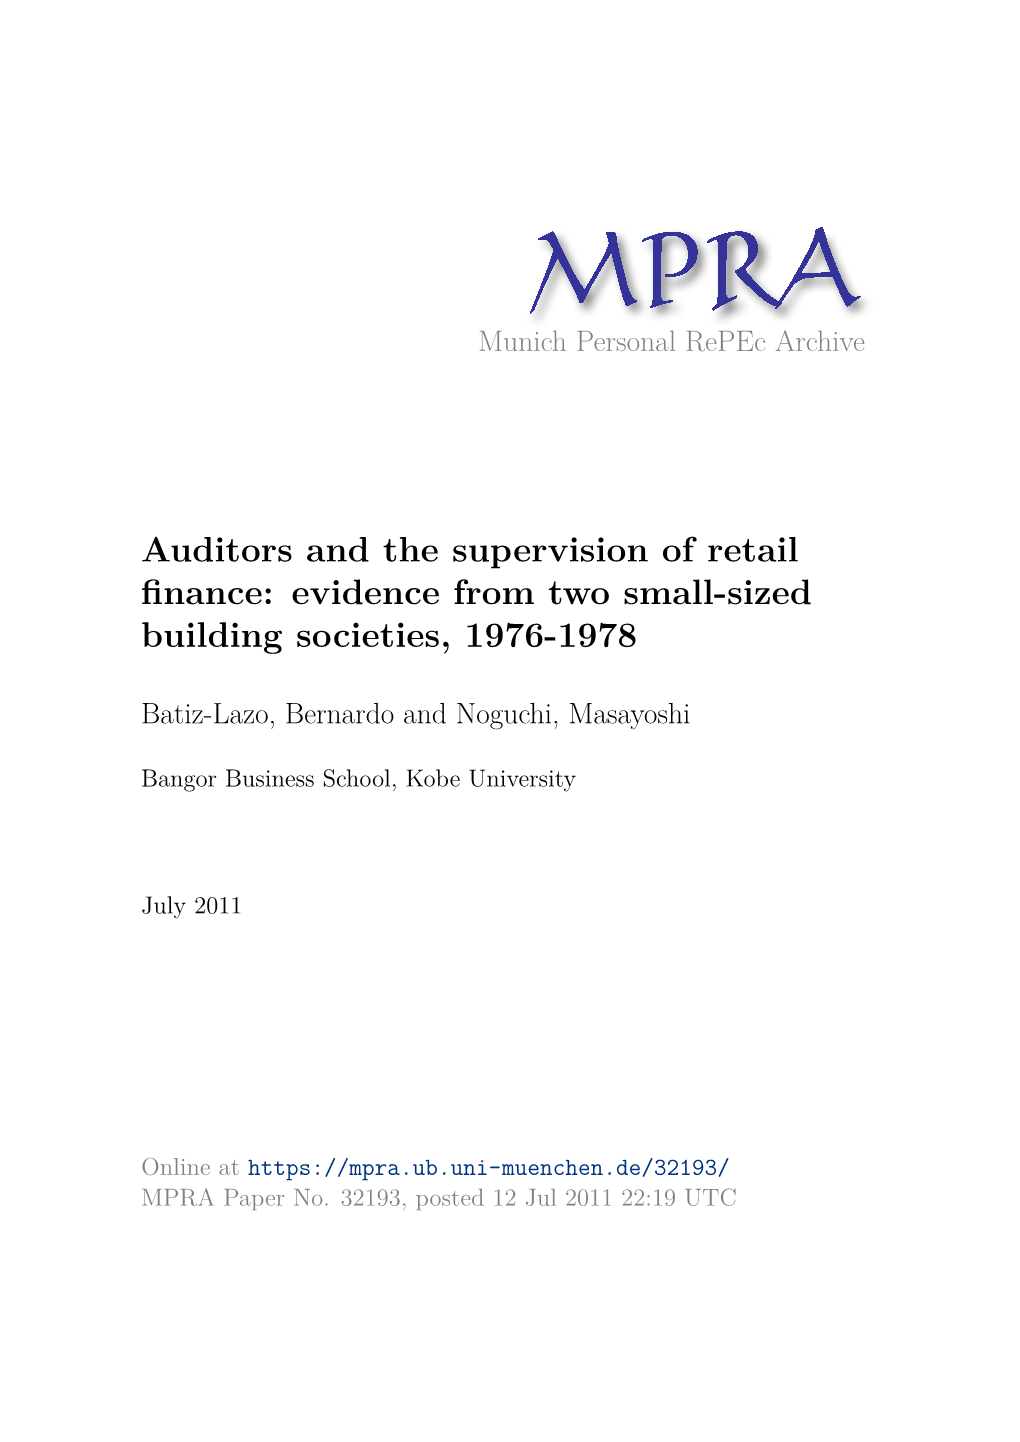 Auditors and the Supervision of Retail Finance: Evidence from Two Small-Sized Building Societies, 1976-1978